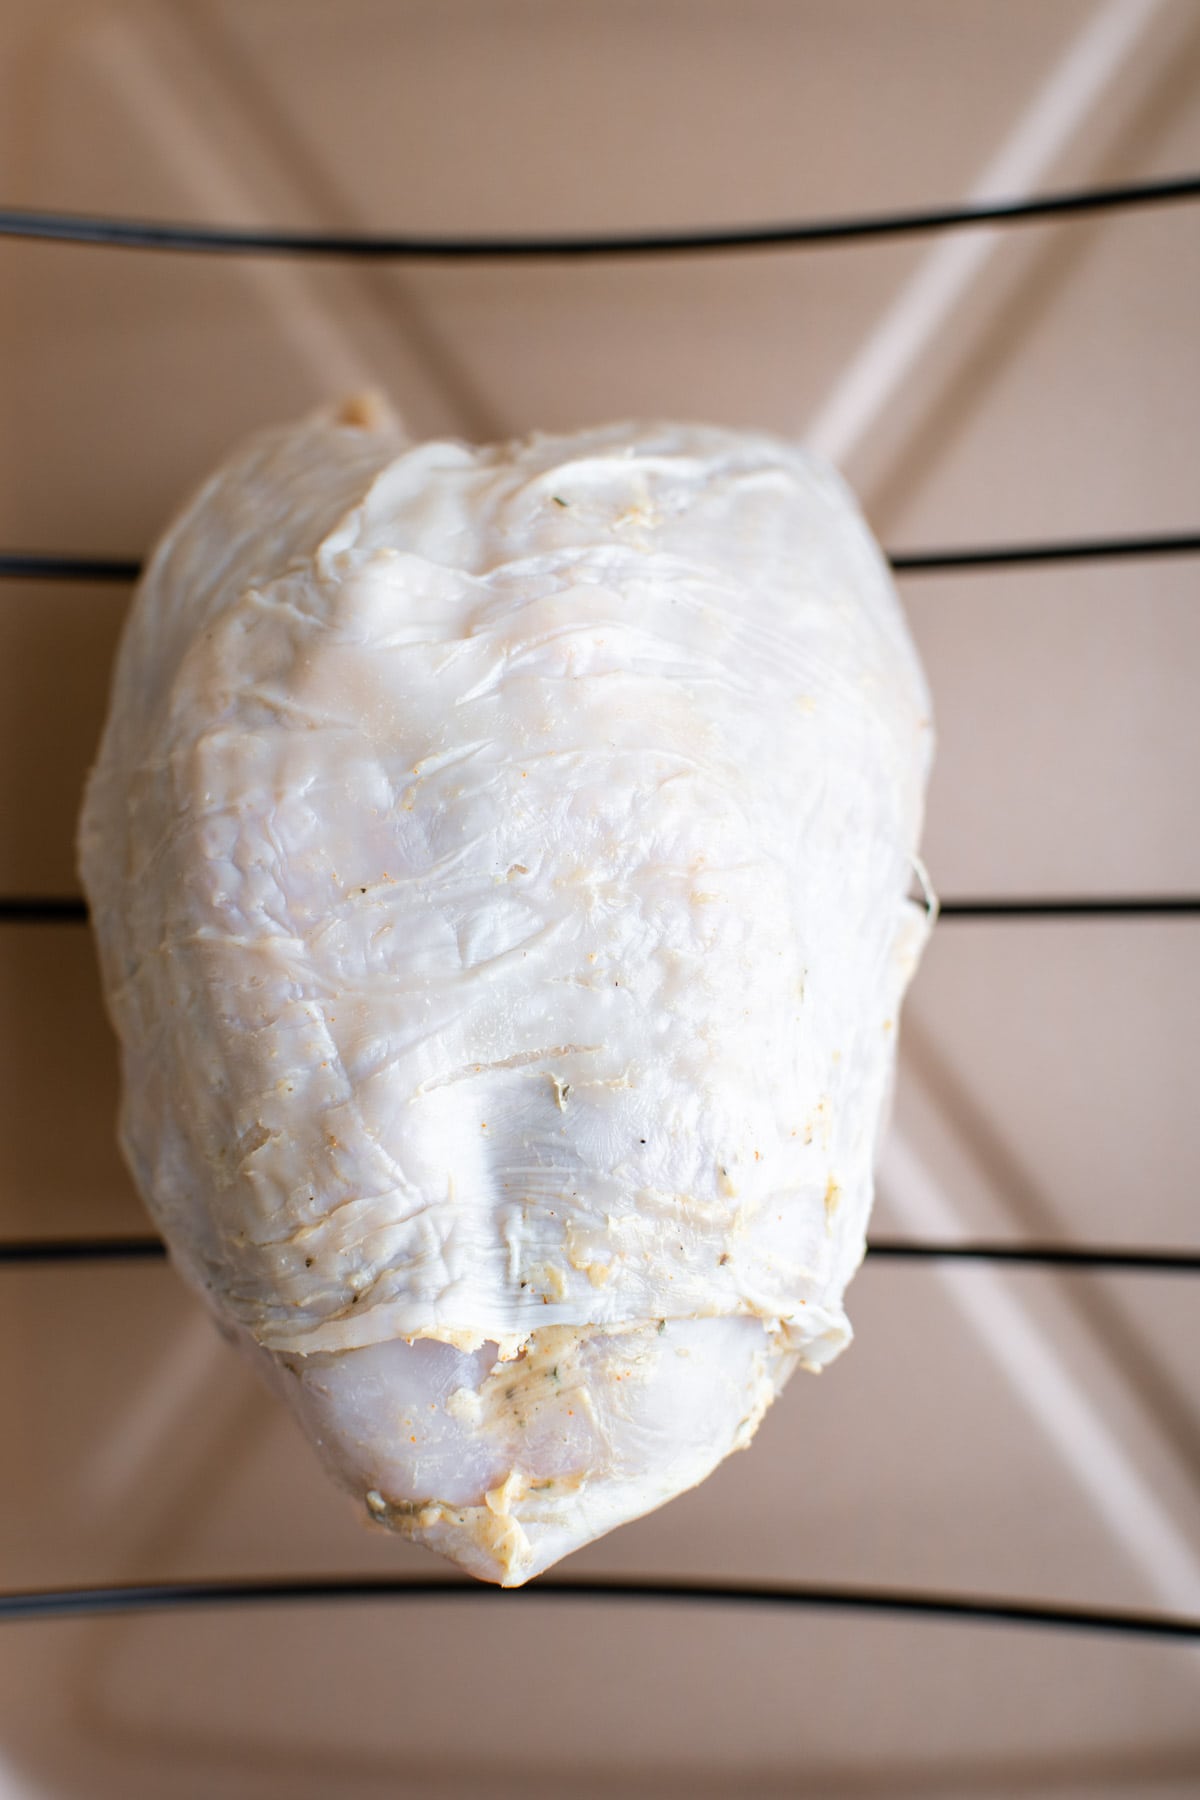 Whole uncooked turkey breast on a rack in a pan.